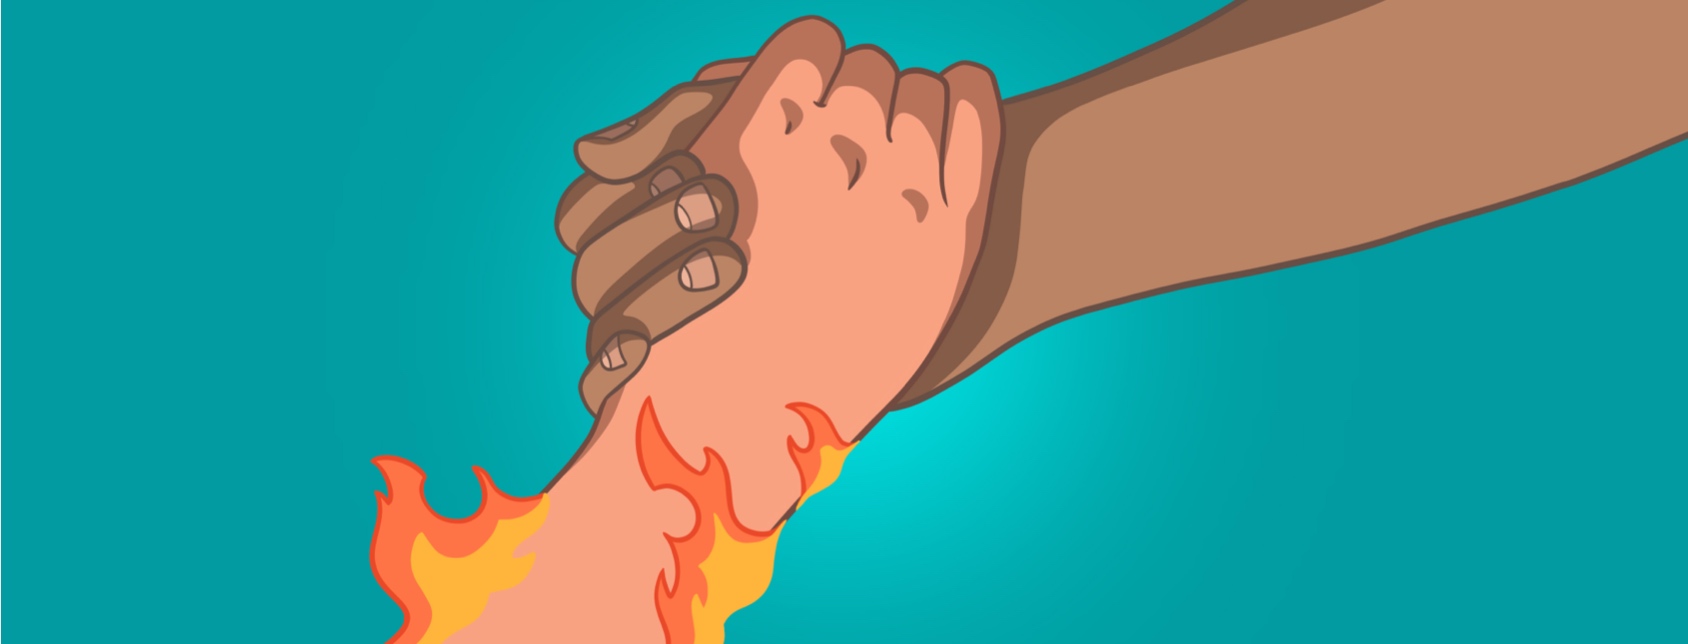 A hand covered in flames clasps another helping hand